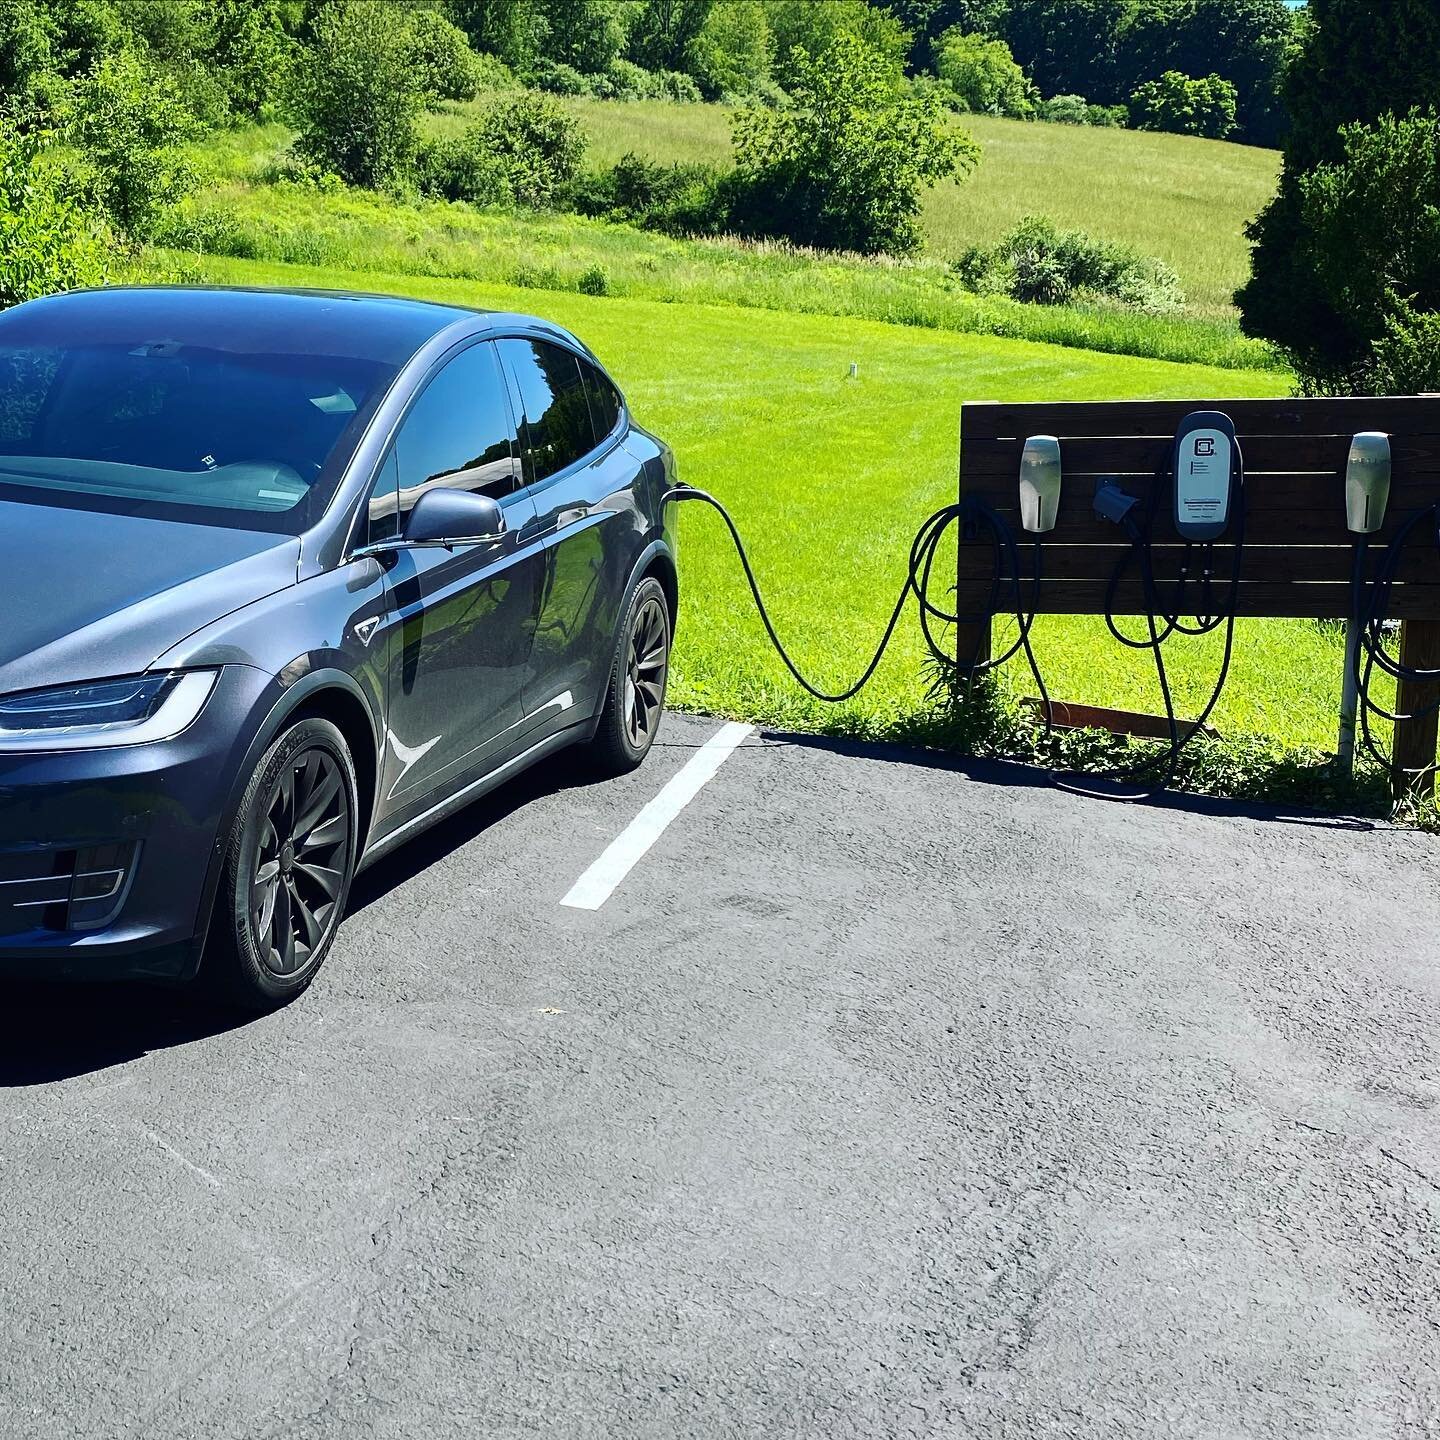 Just a friendly reminder, we provide free charging for your electric vehicles during your stay at the farm. Charging for non-guests can also be arranged.

#tesla #ev #pluginhybrid